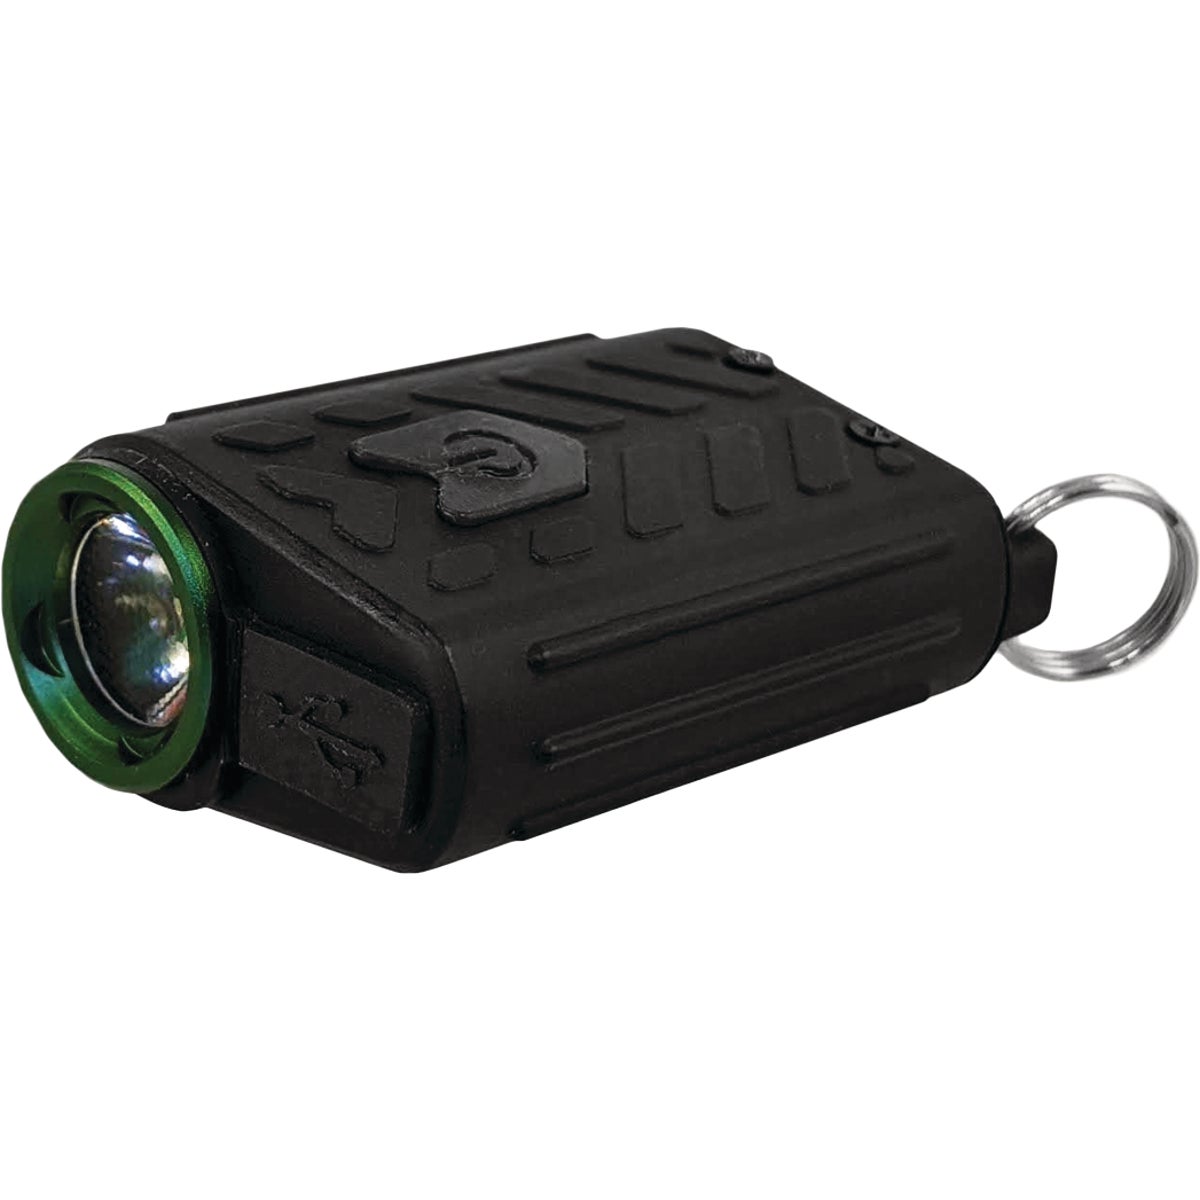 Police Security Seeker-R 150 Lm. Rechargeable LED Keychain Light